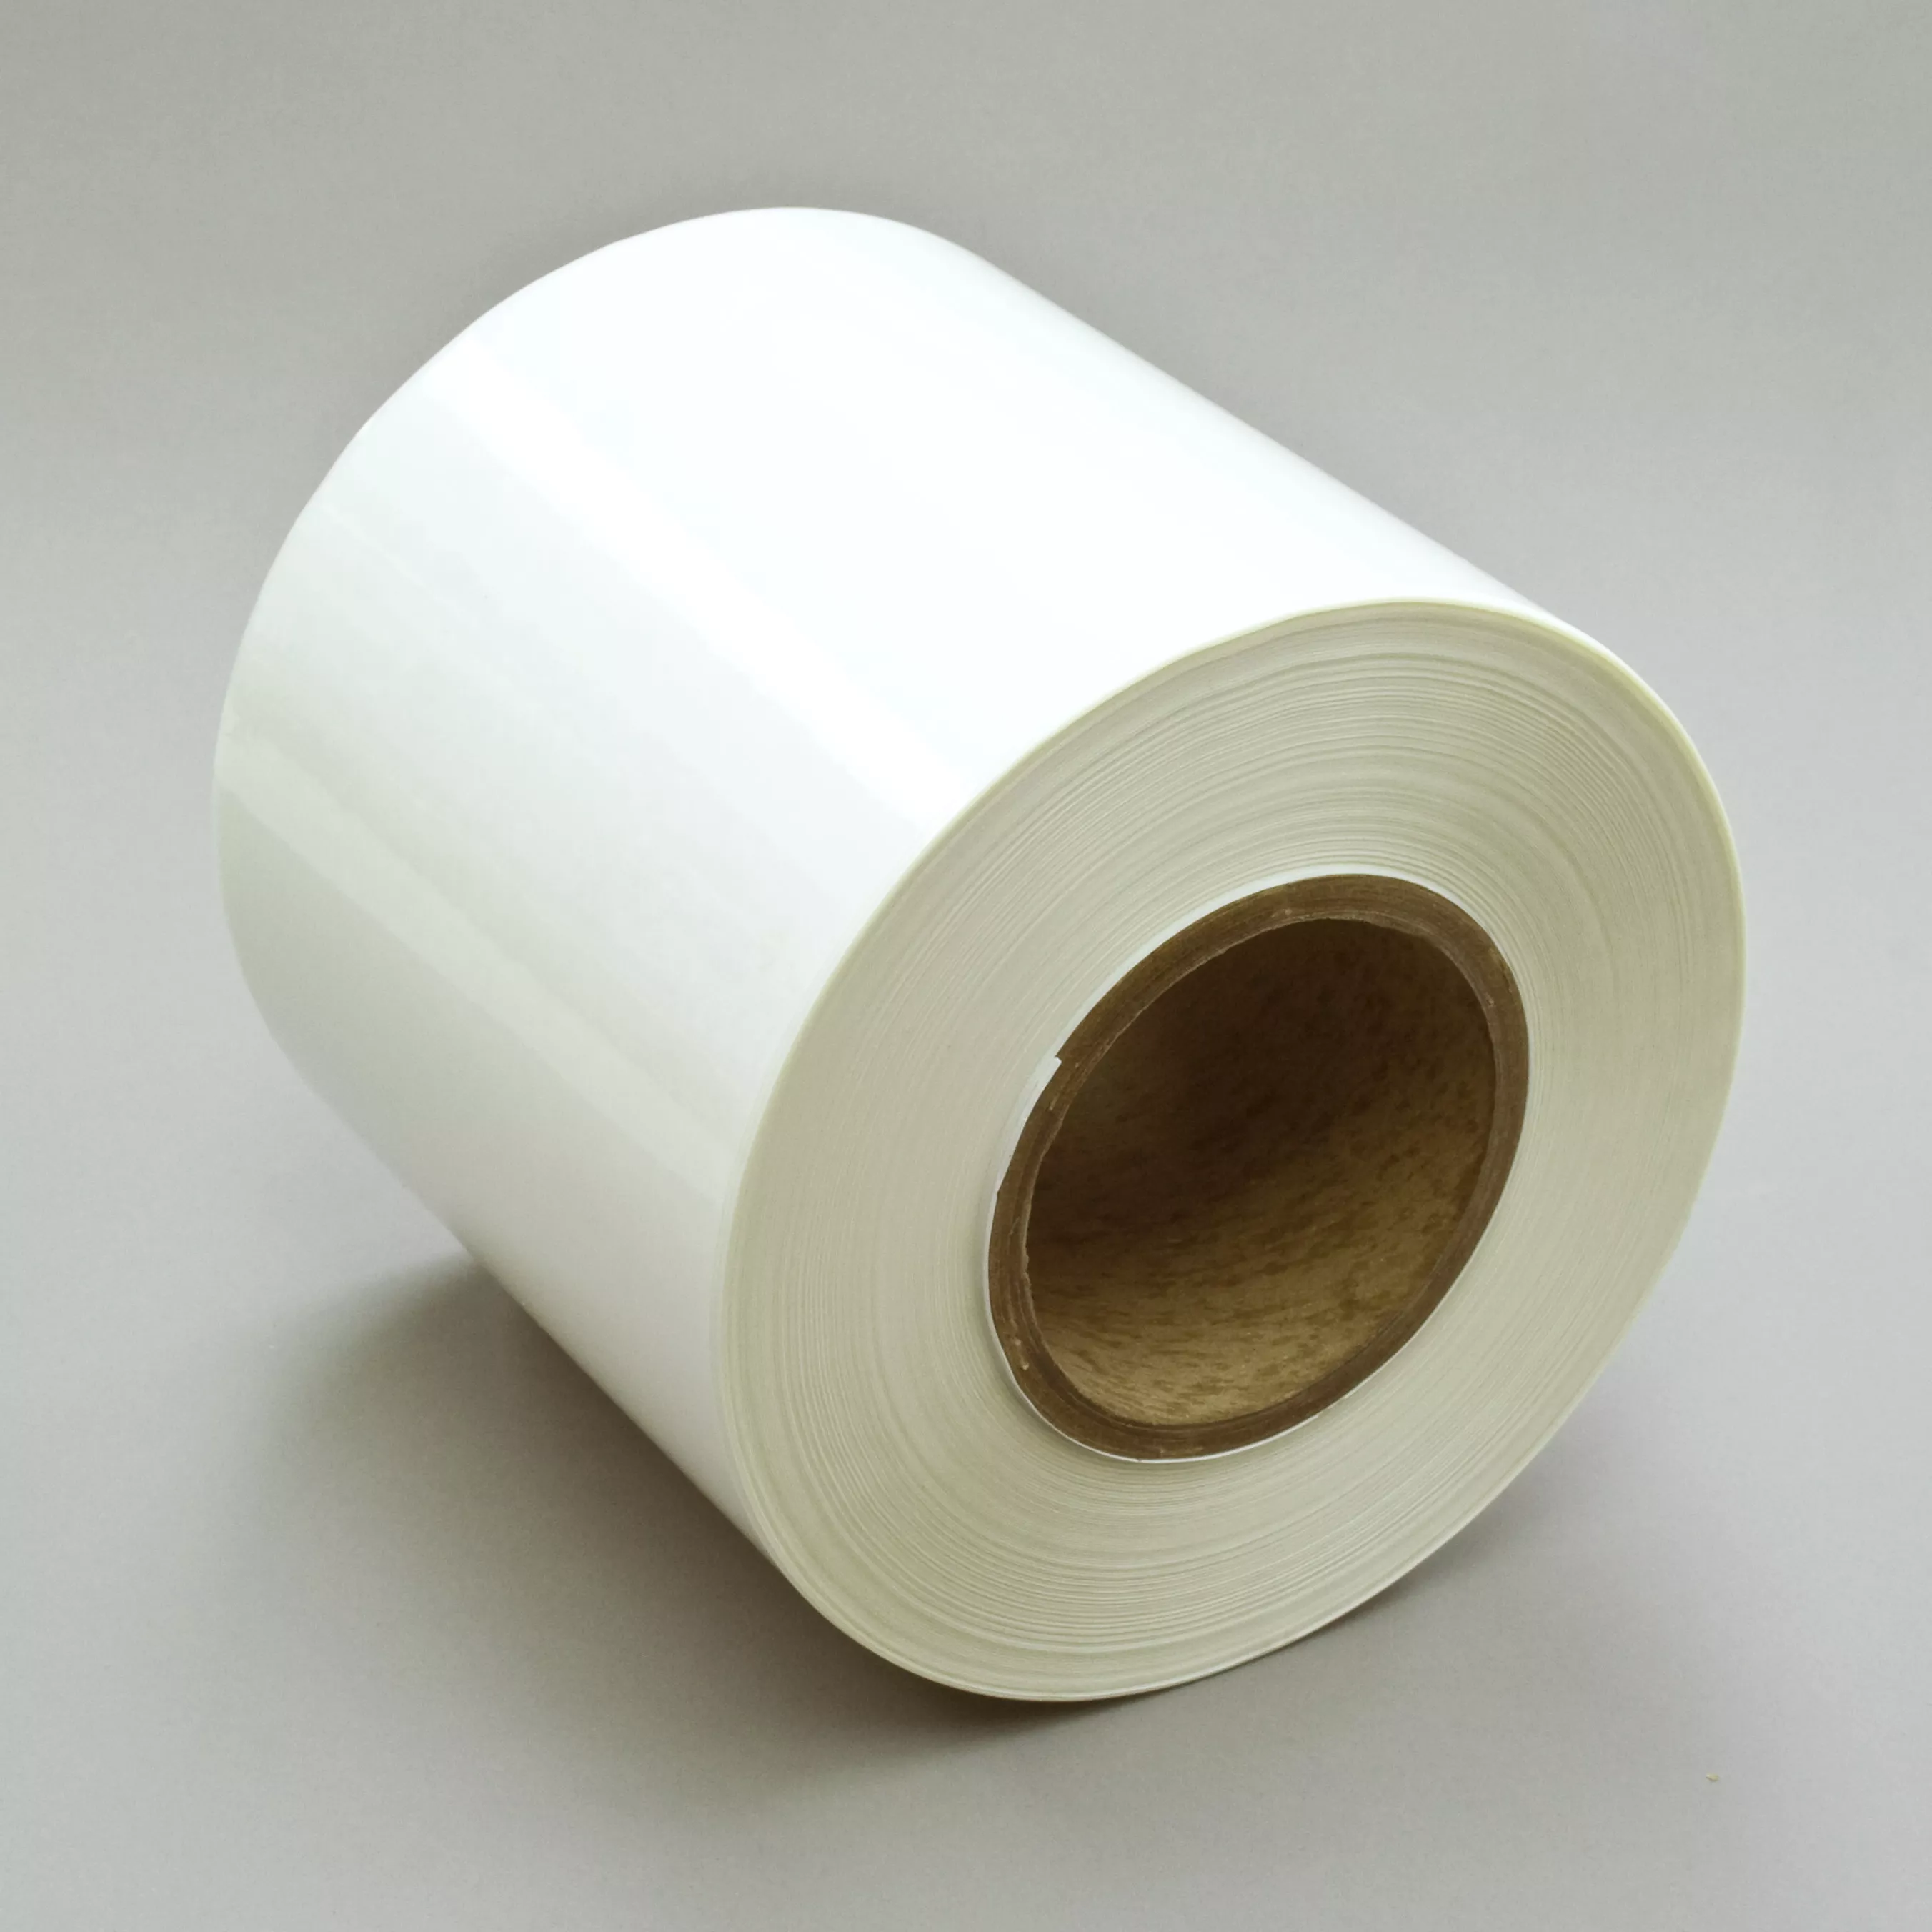 3M™ Thermal Transfer Label Material 7876, Clear Polyester Gloss, 4.5 in
x 1668 ft, 1 Roll/Case